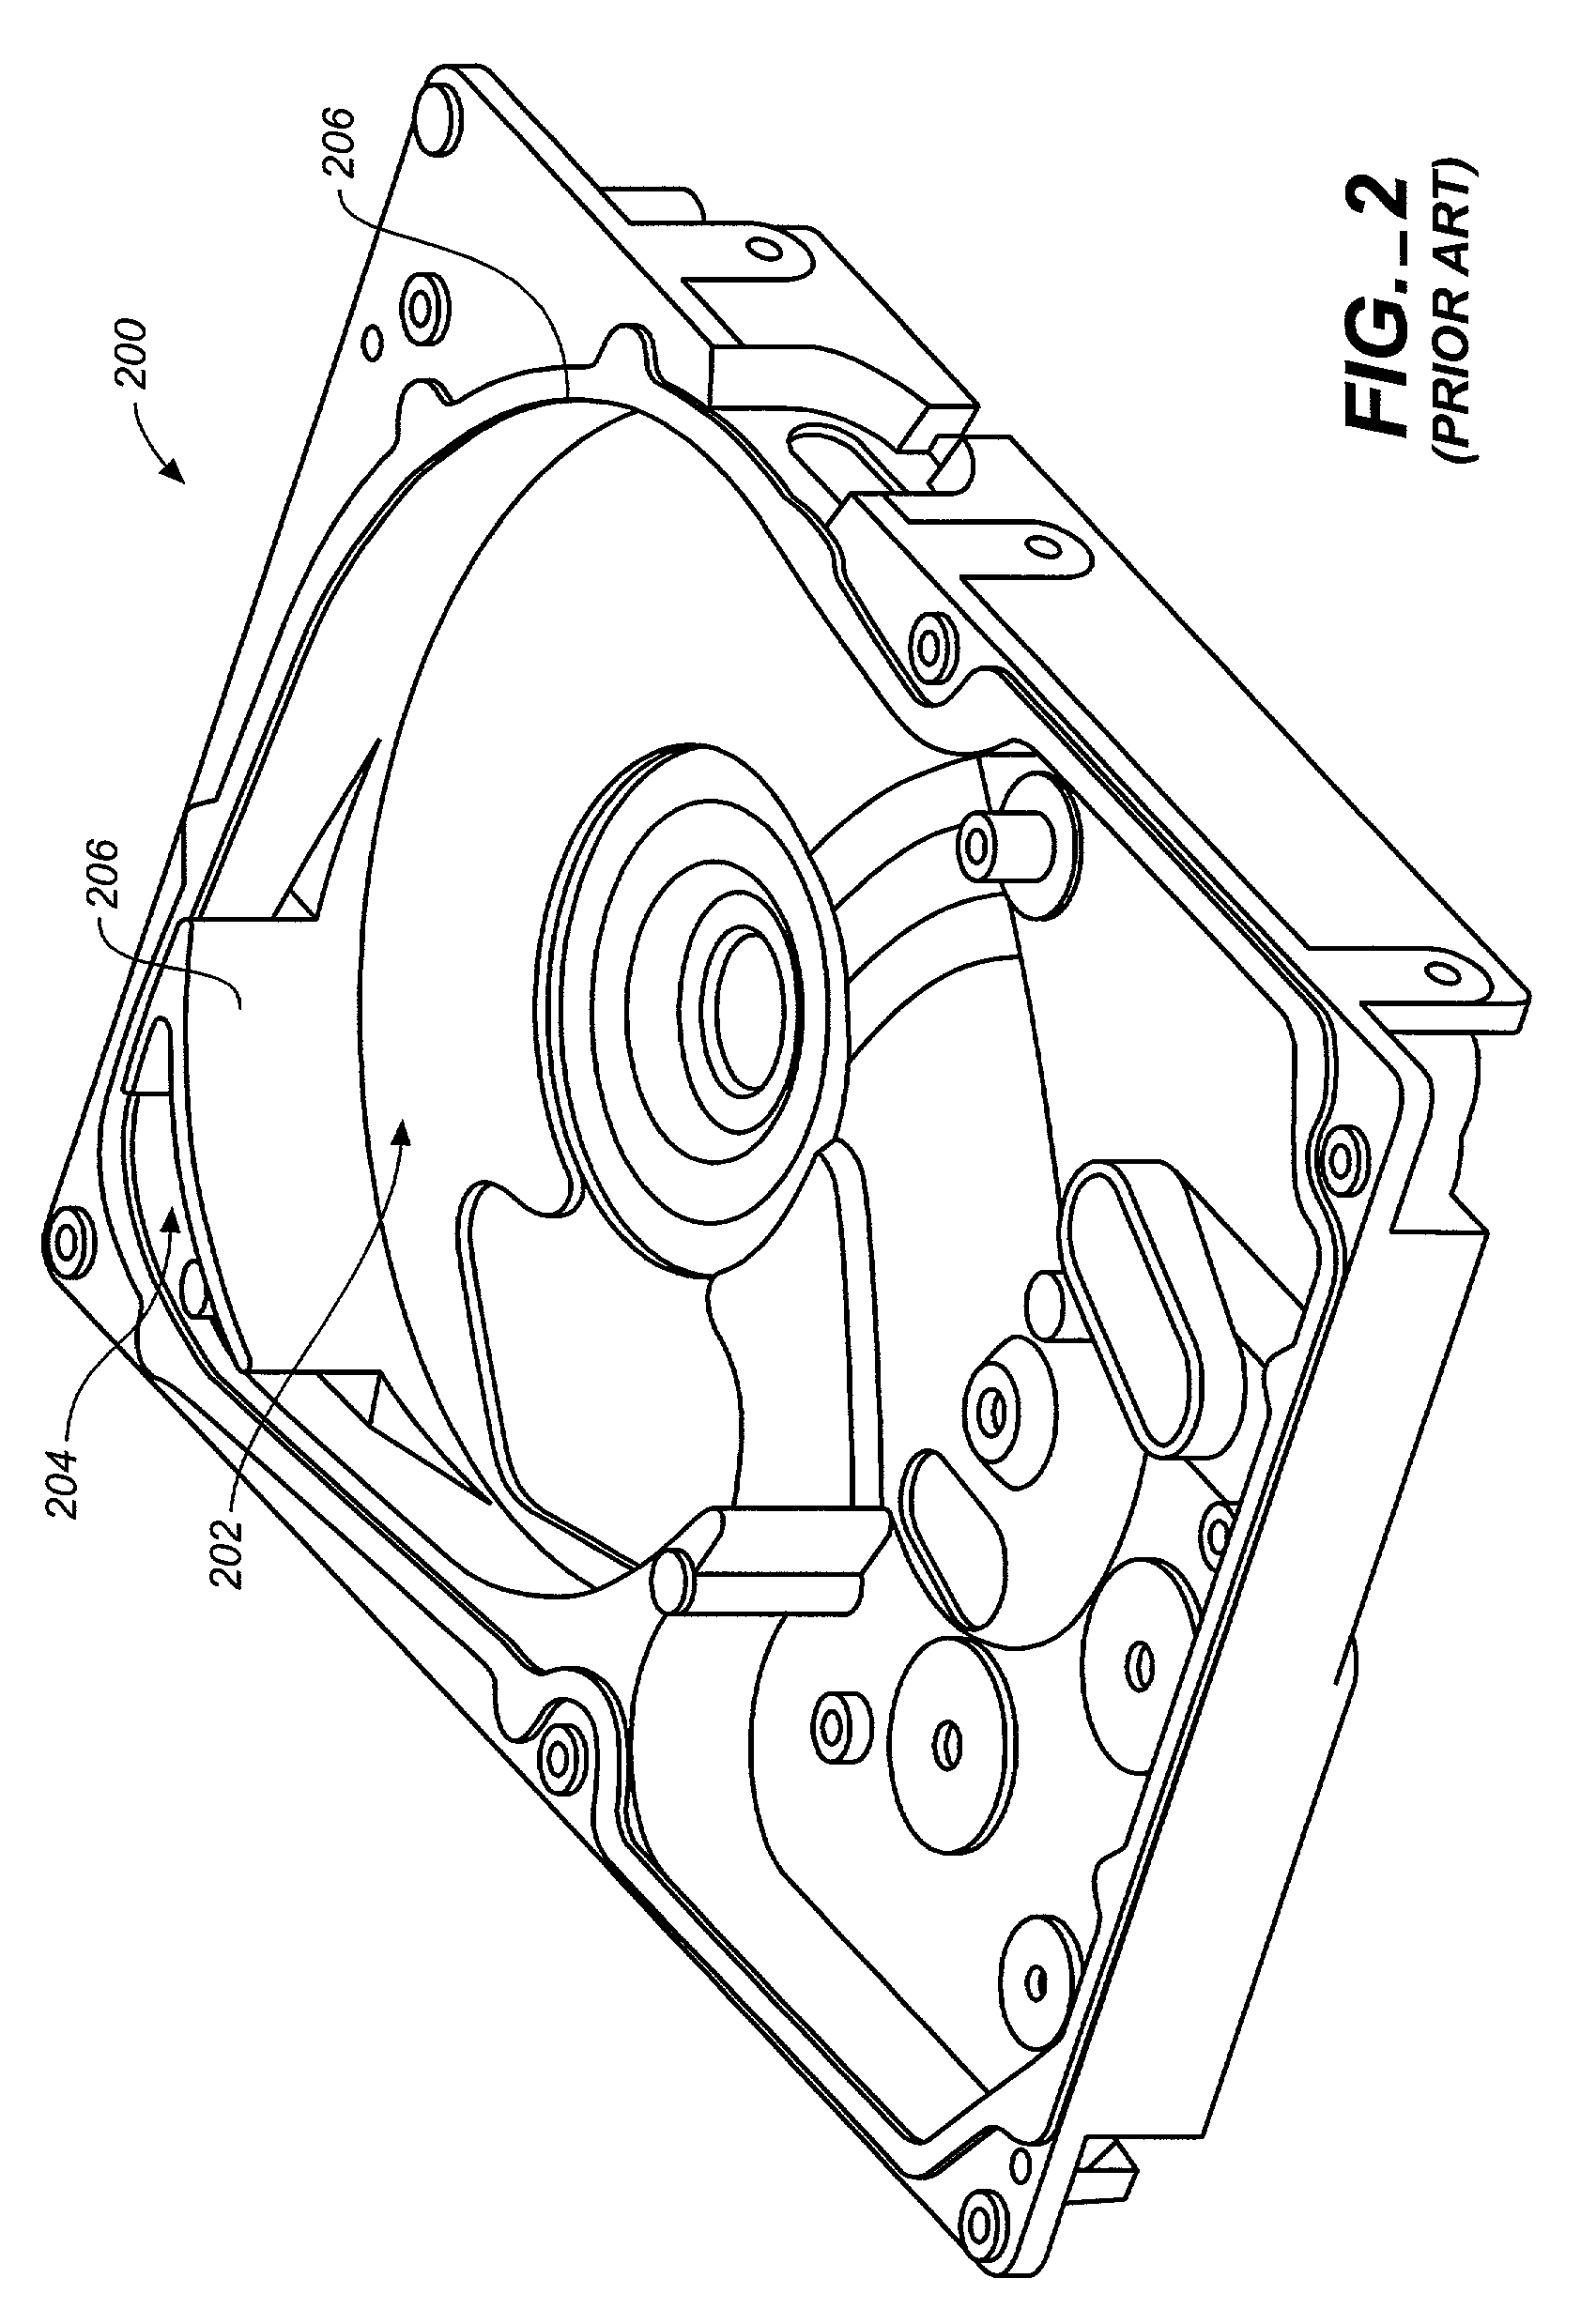 Disc drive air borne filtering channel